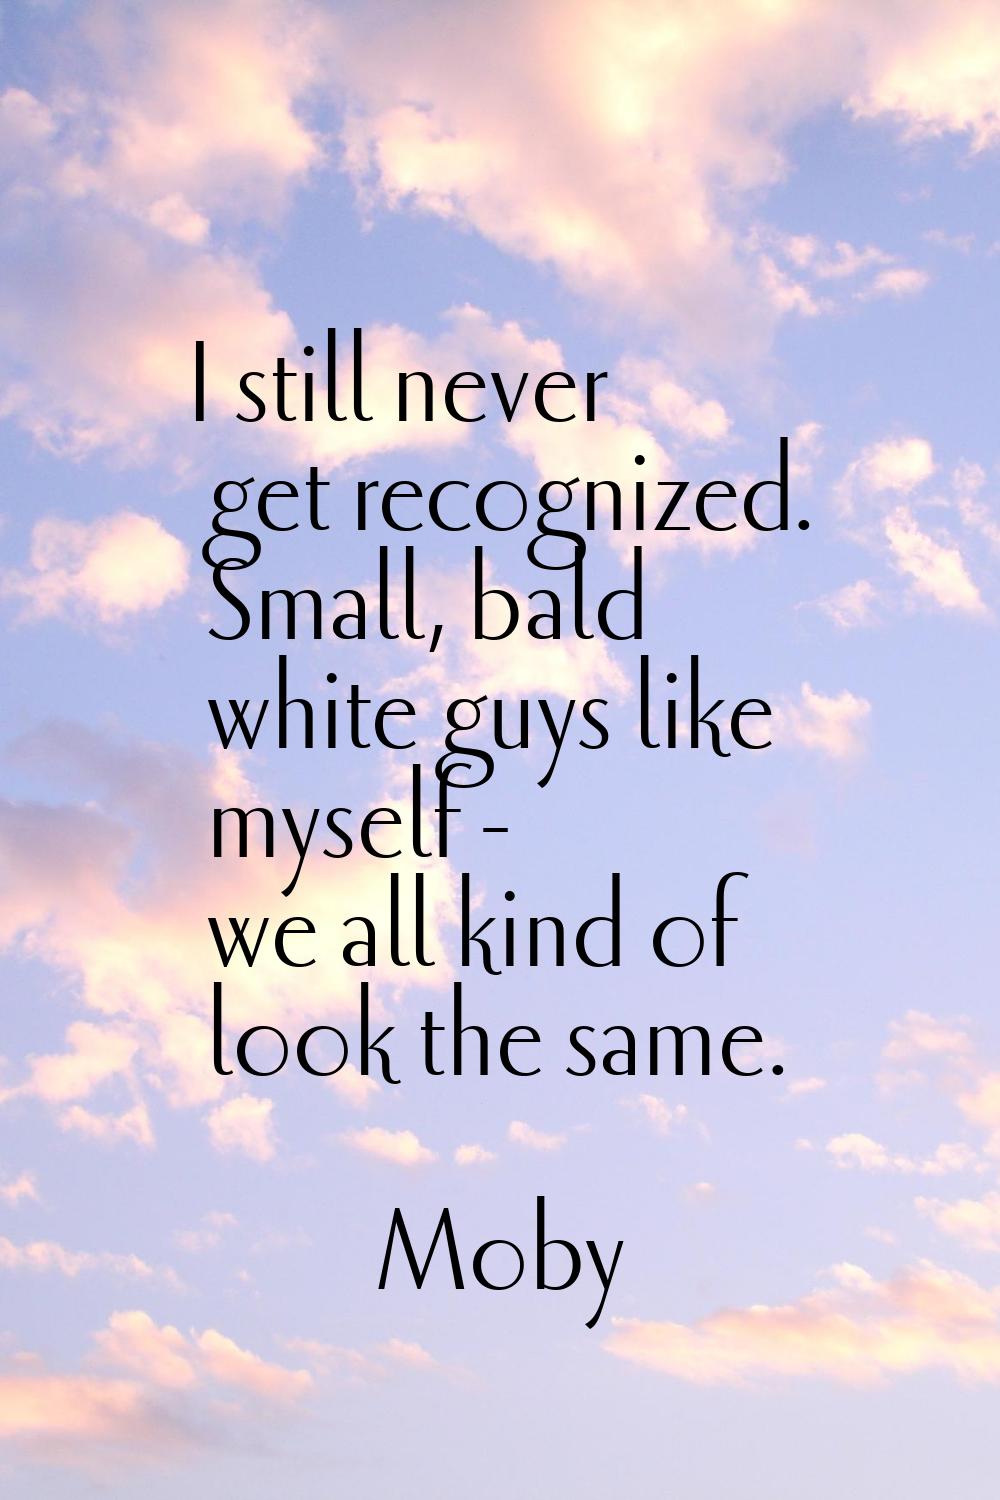 I still never get recognized. Small, bald white guys like myself - we all kind of look the same.